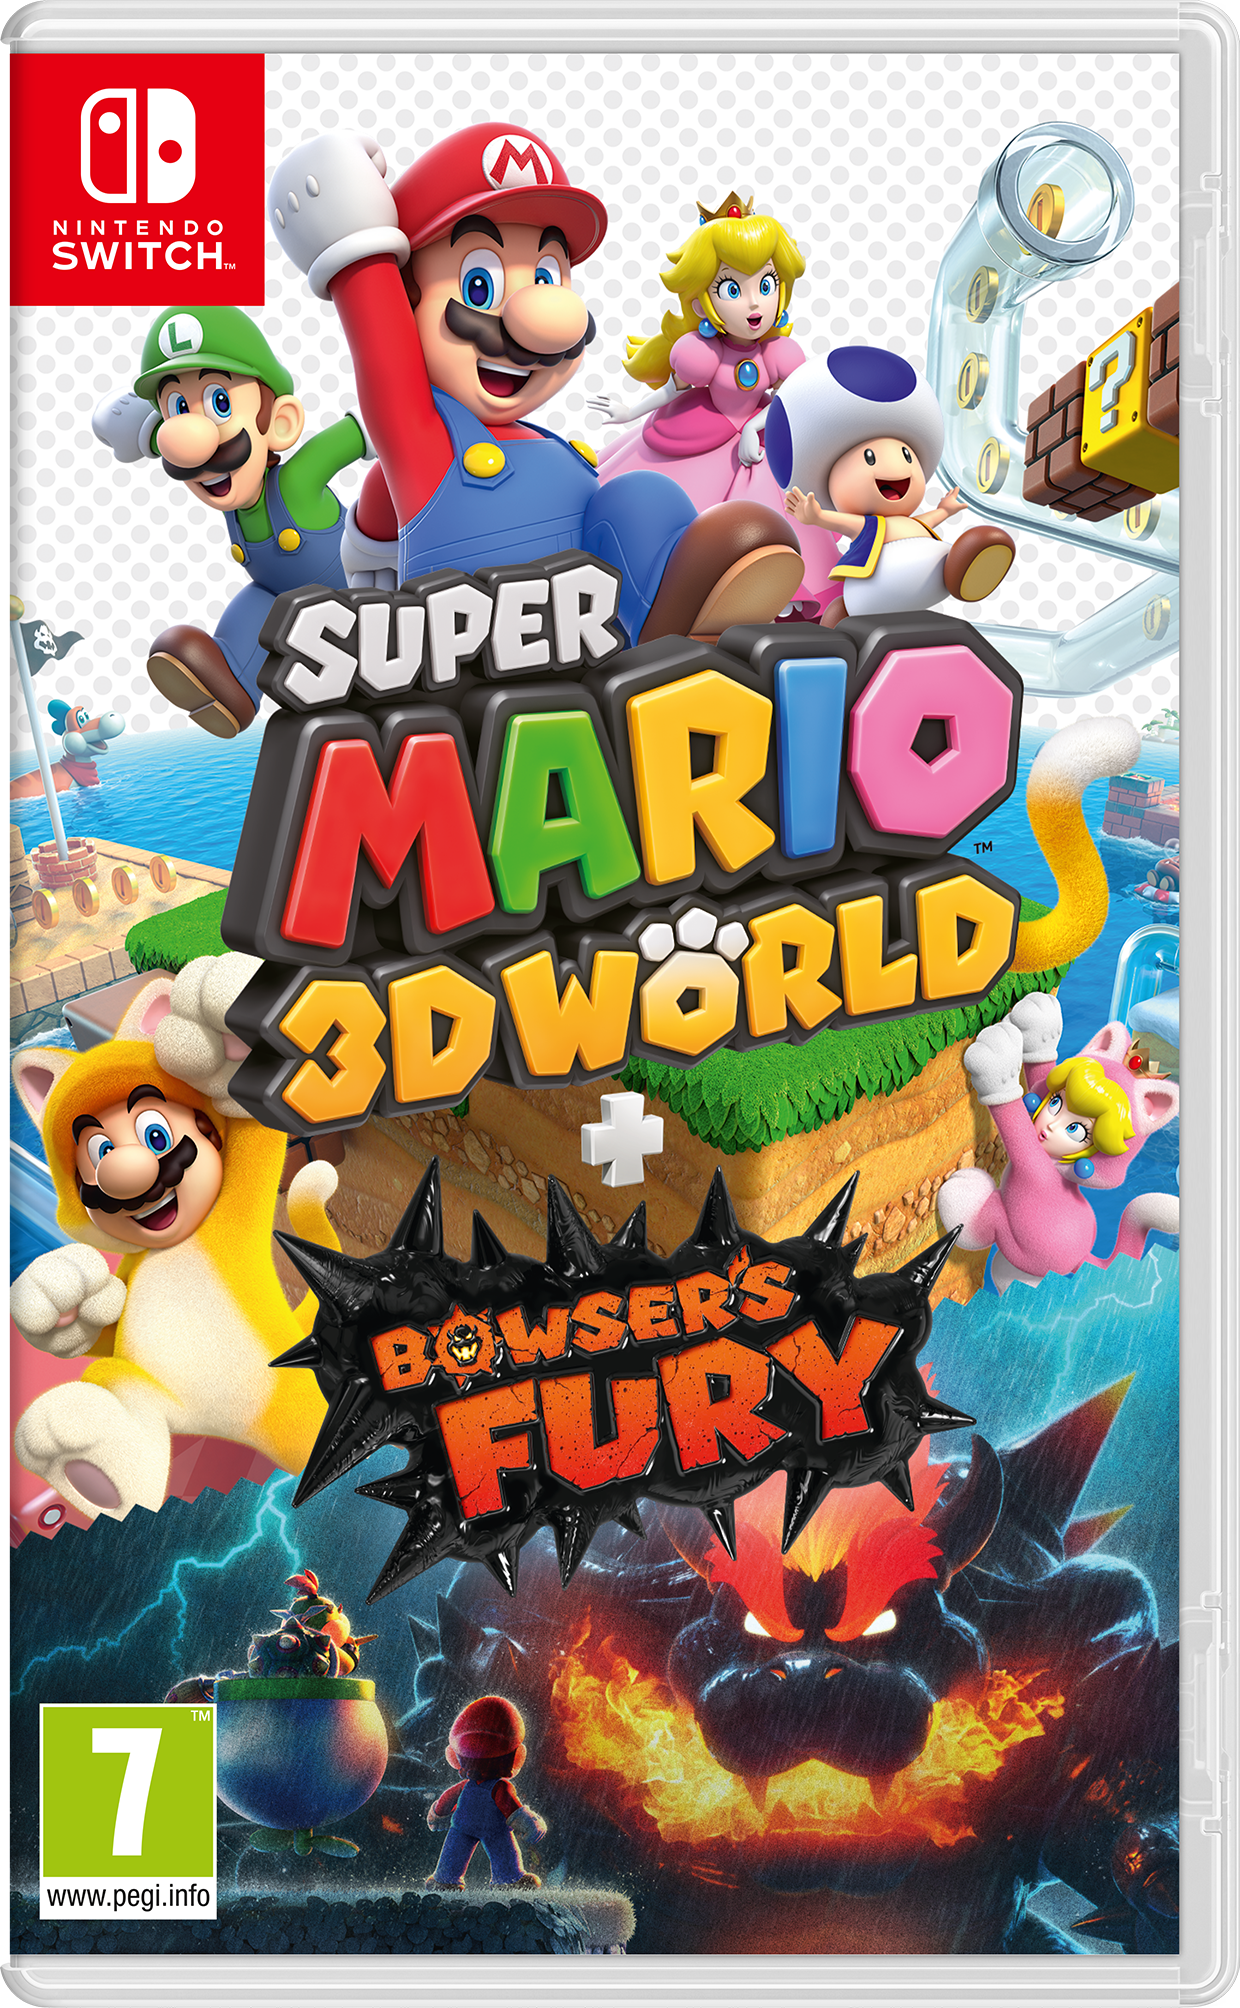 Mario 3d World Switch Buy Super Mario 3D World + Bowser's Fury - Free shipping